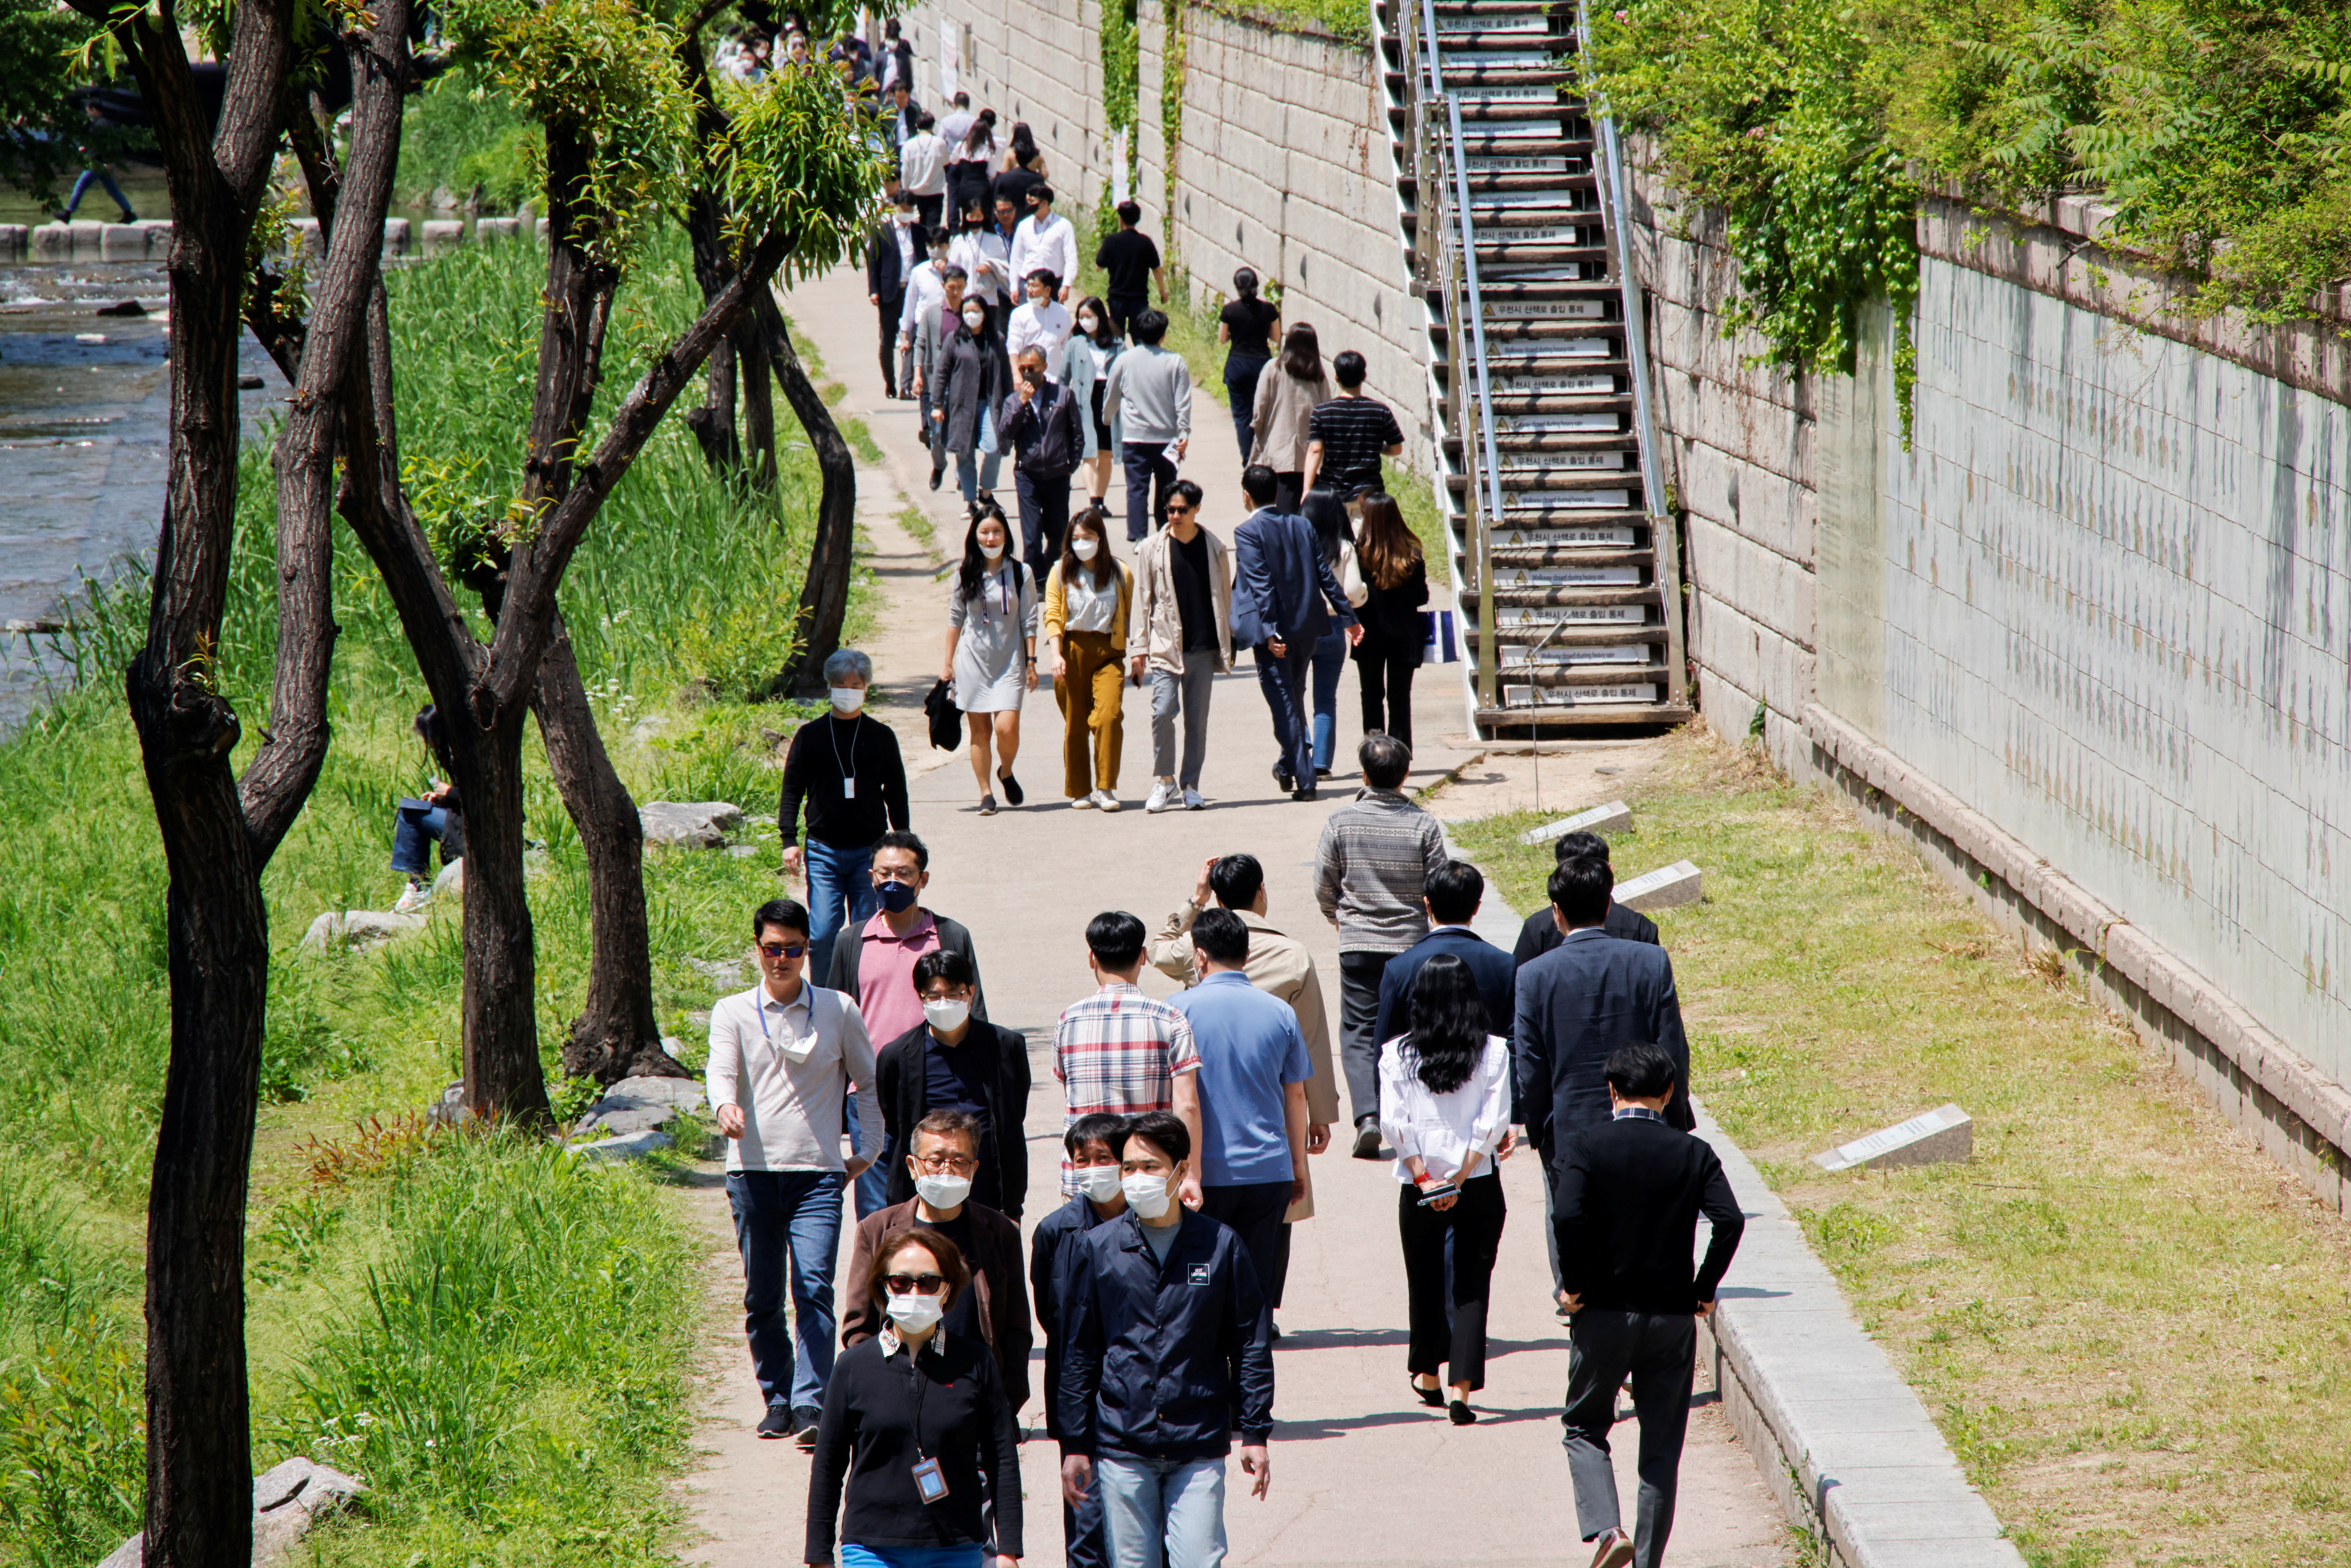 People wear masks to prevent the spread of the coronavirus disease (COVID-19) as they take a walk on a sunny spring day in Seoul